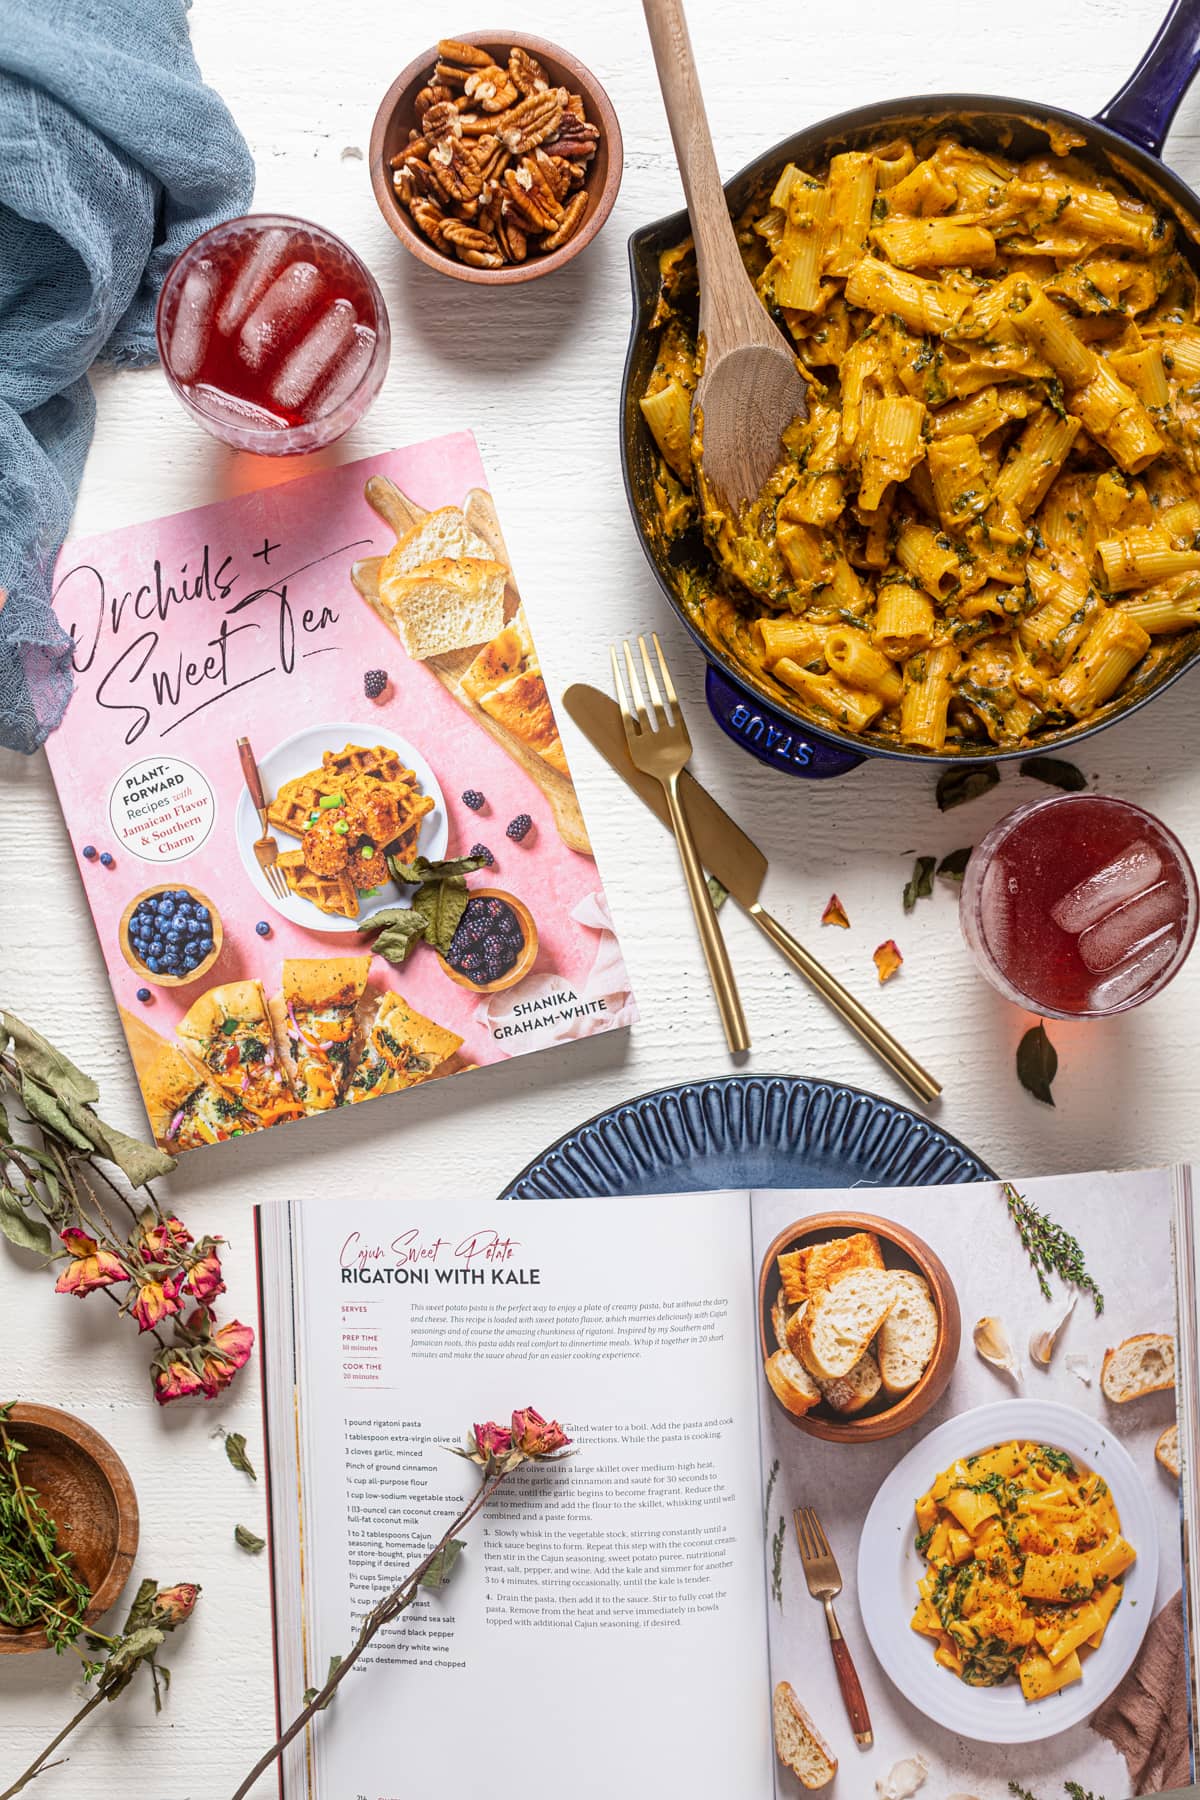 Orchid + Sweet Tea cookbooks on a table with plates, glasses, and a skillet of pasta